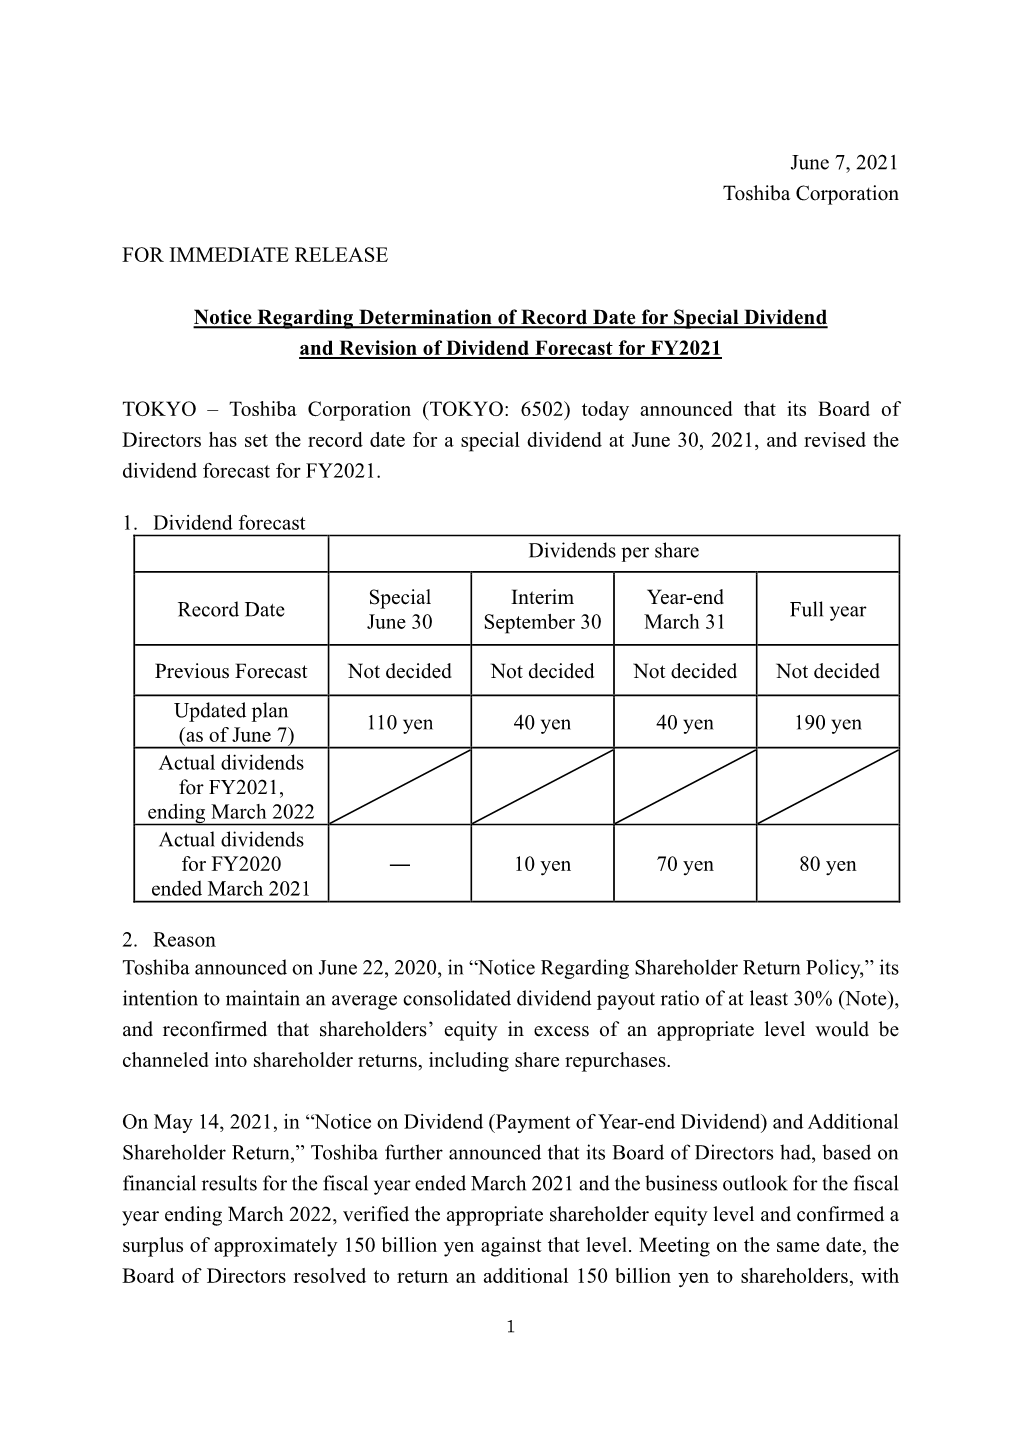 Notice Regarding Determination of Record Date for Special Dividend and Revision of Dividend Forecast for FY2021